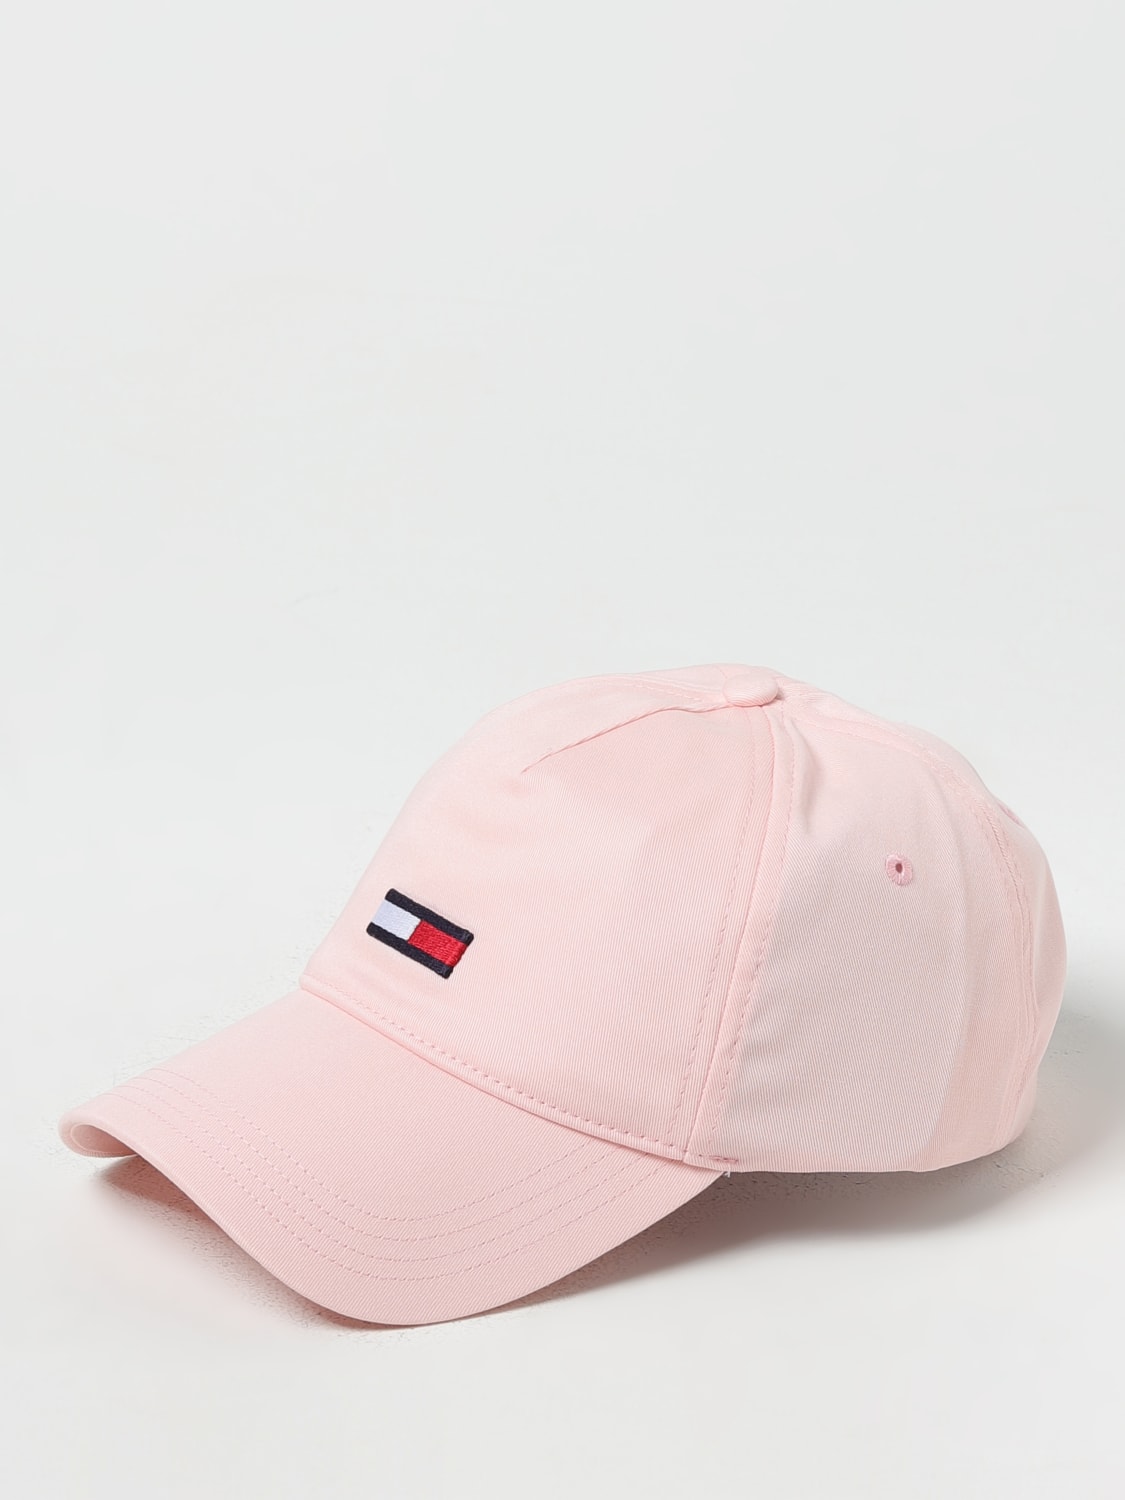 TOMMY HILFIGER: hat women Hilfiger at - for hat online Tommy AW0AW14986 Pink 